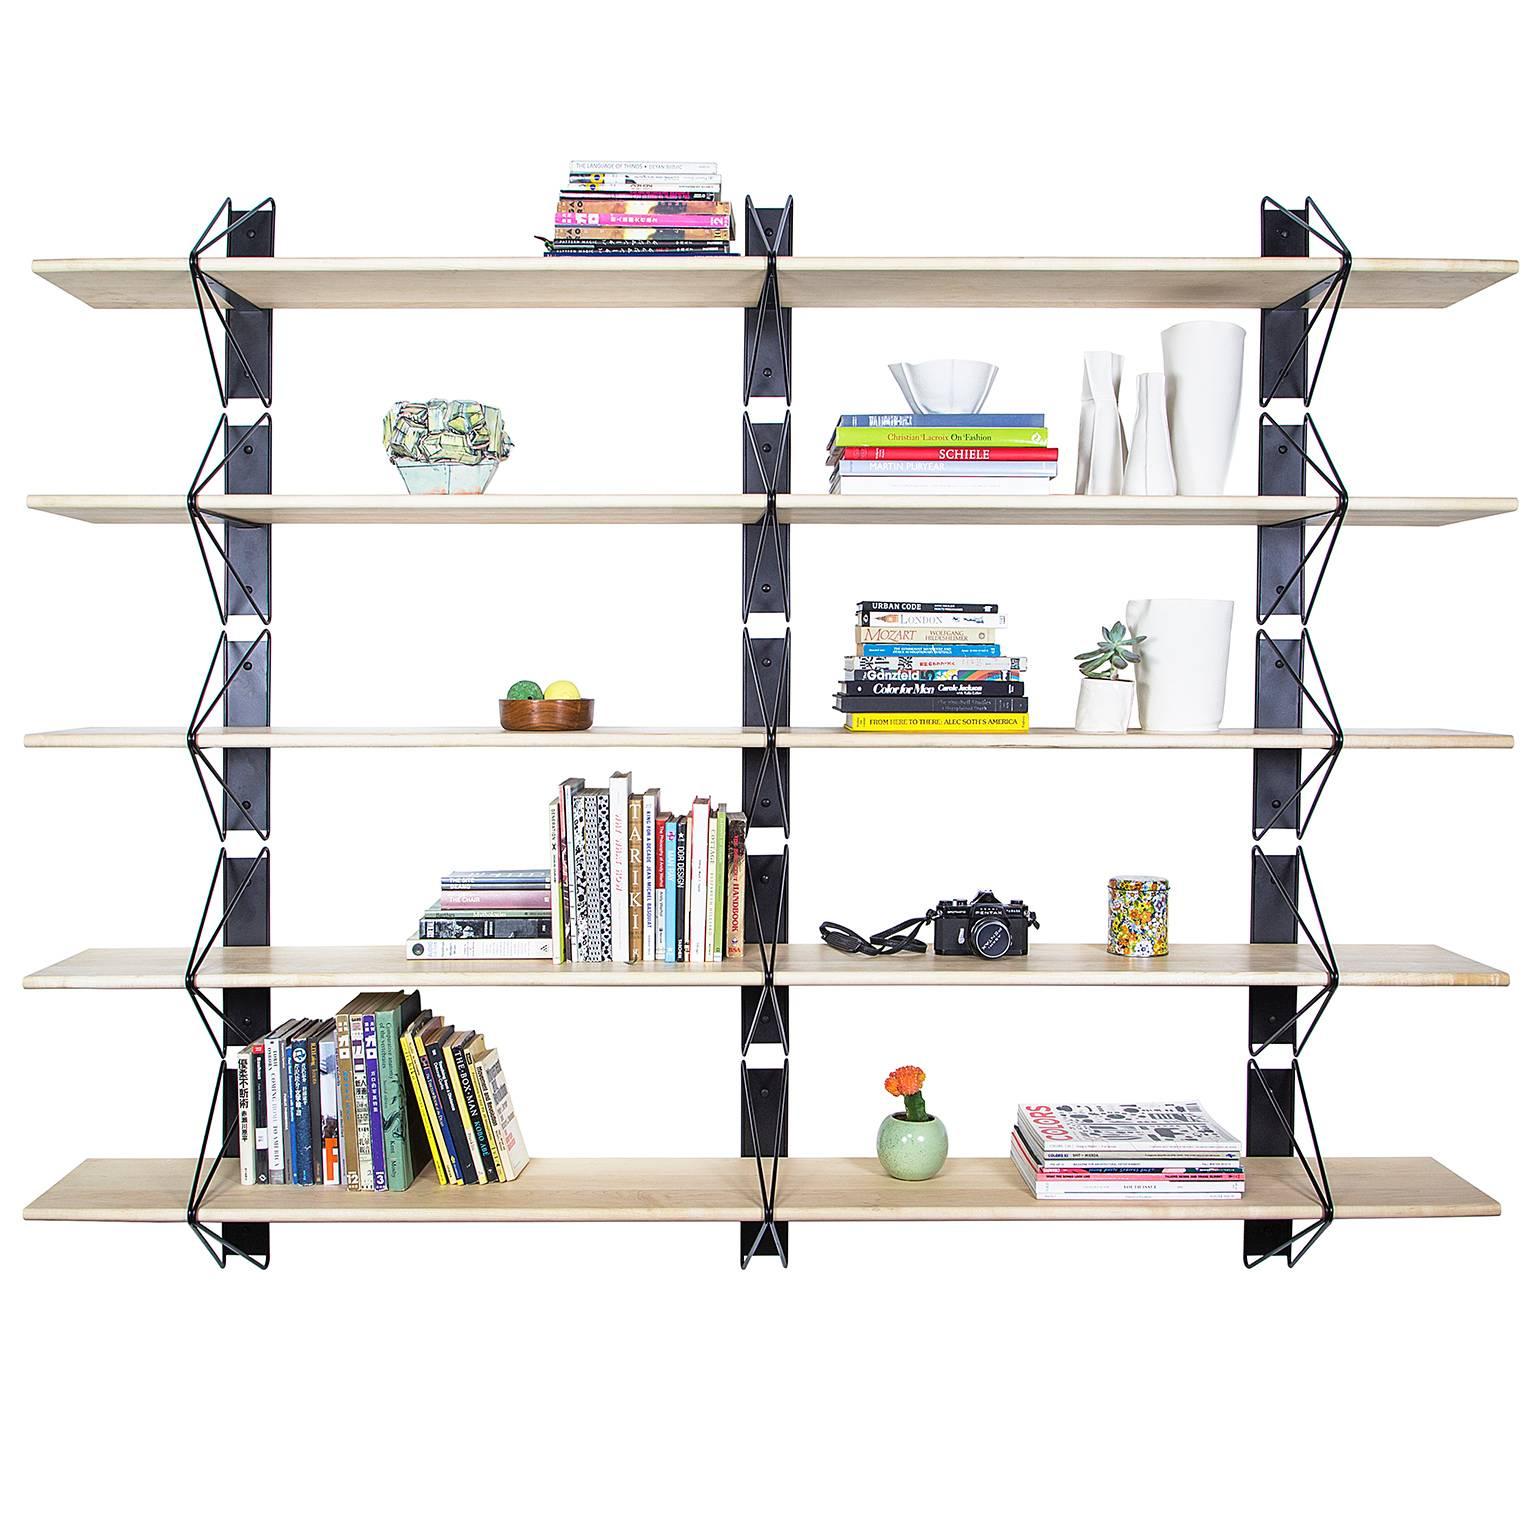 American Set of 5 Strut Shelves from Souda, 84in, Black and Walnut, Made to Order For Sale